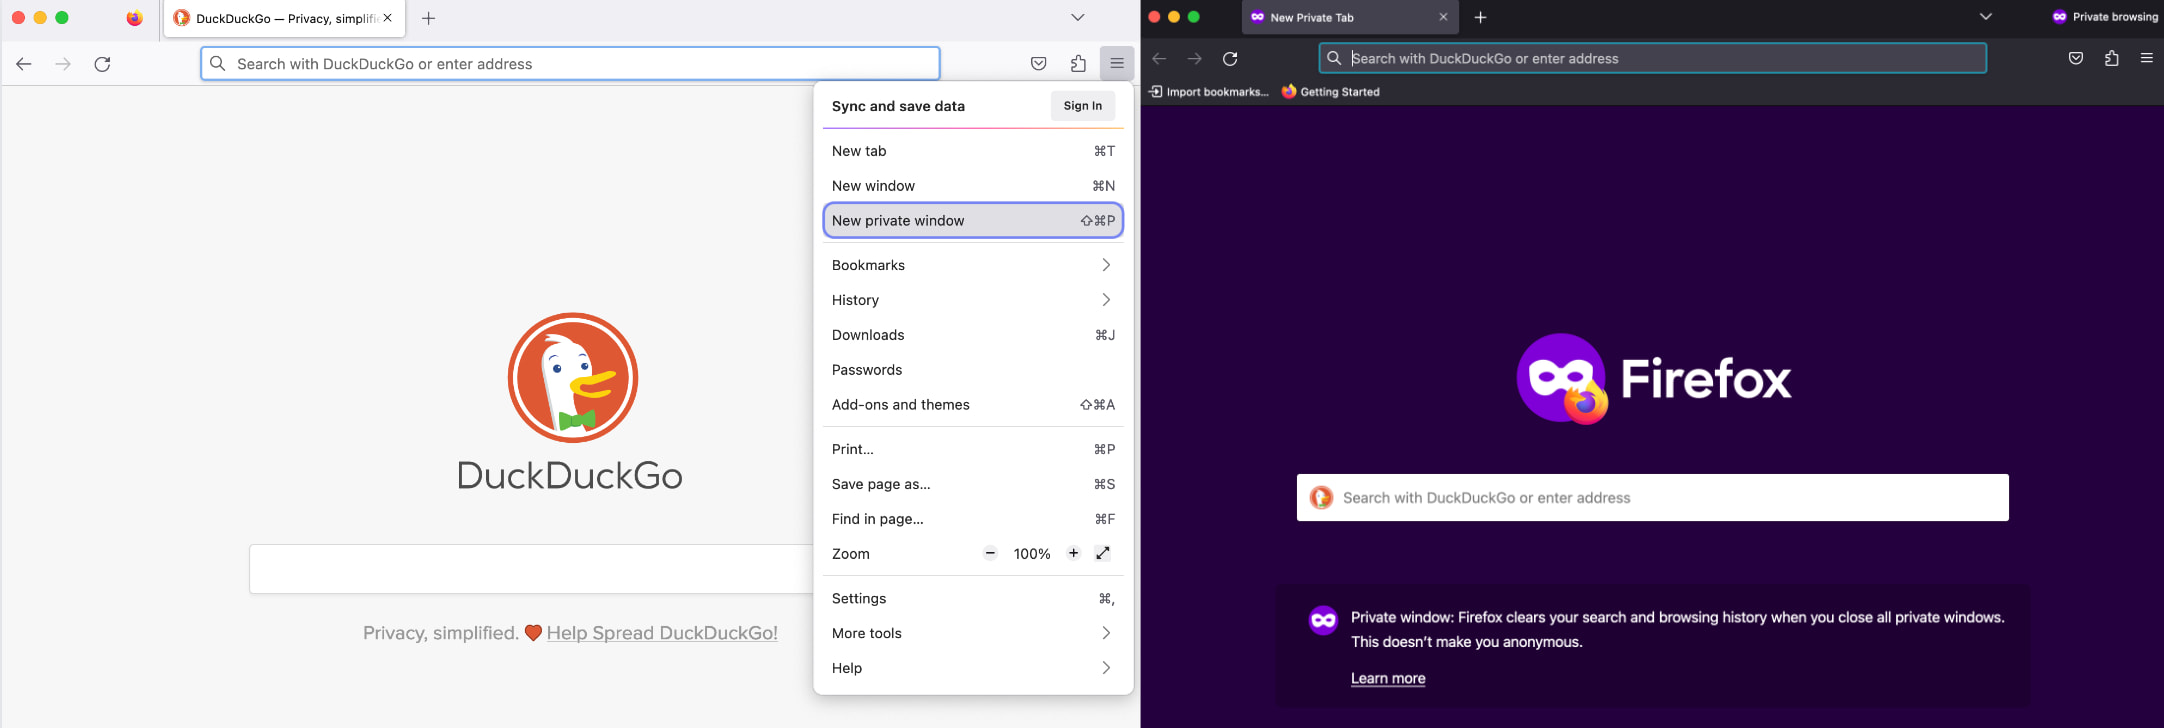 Firefox normal and private browsing modes.